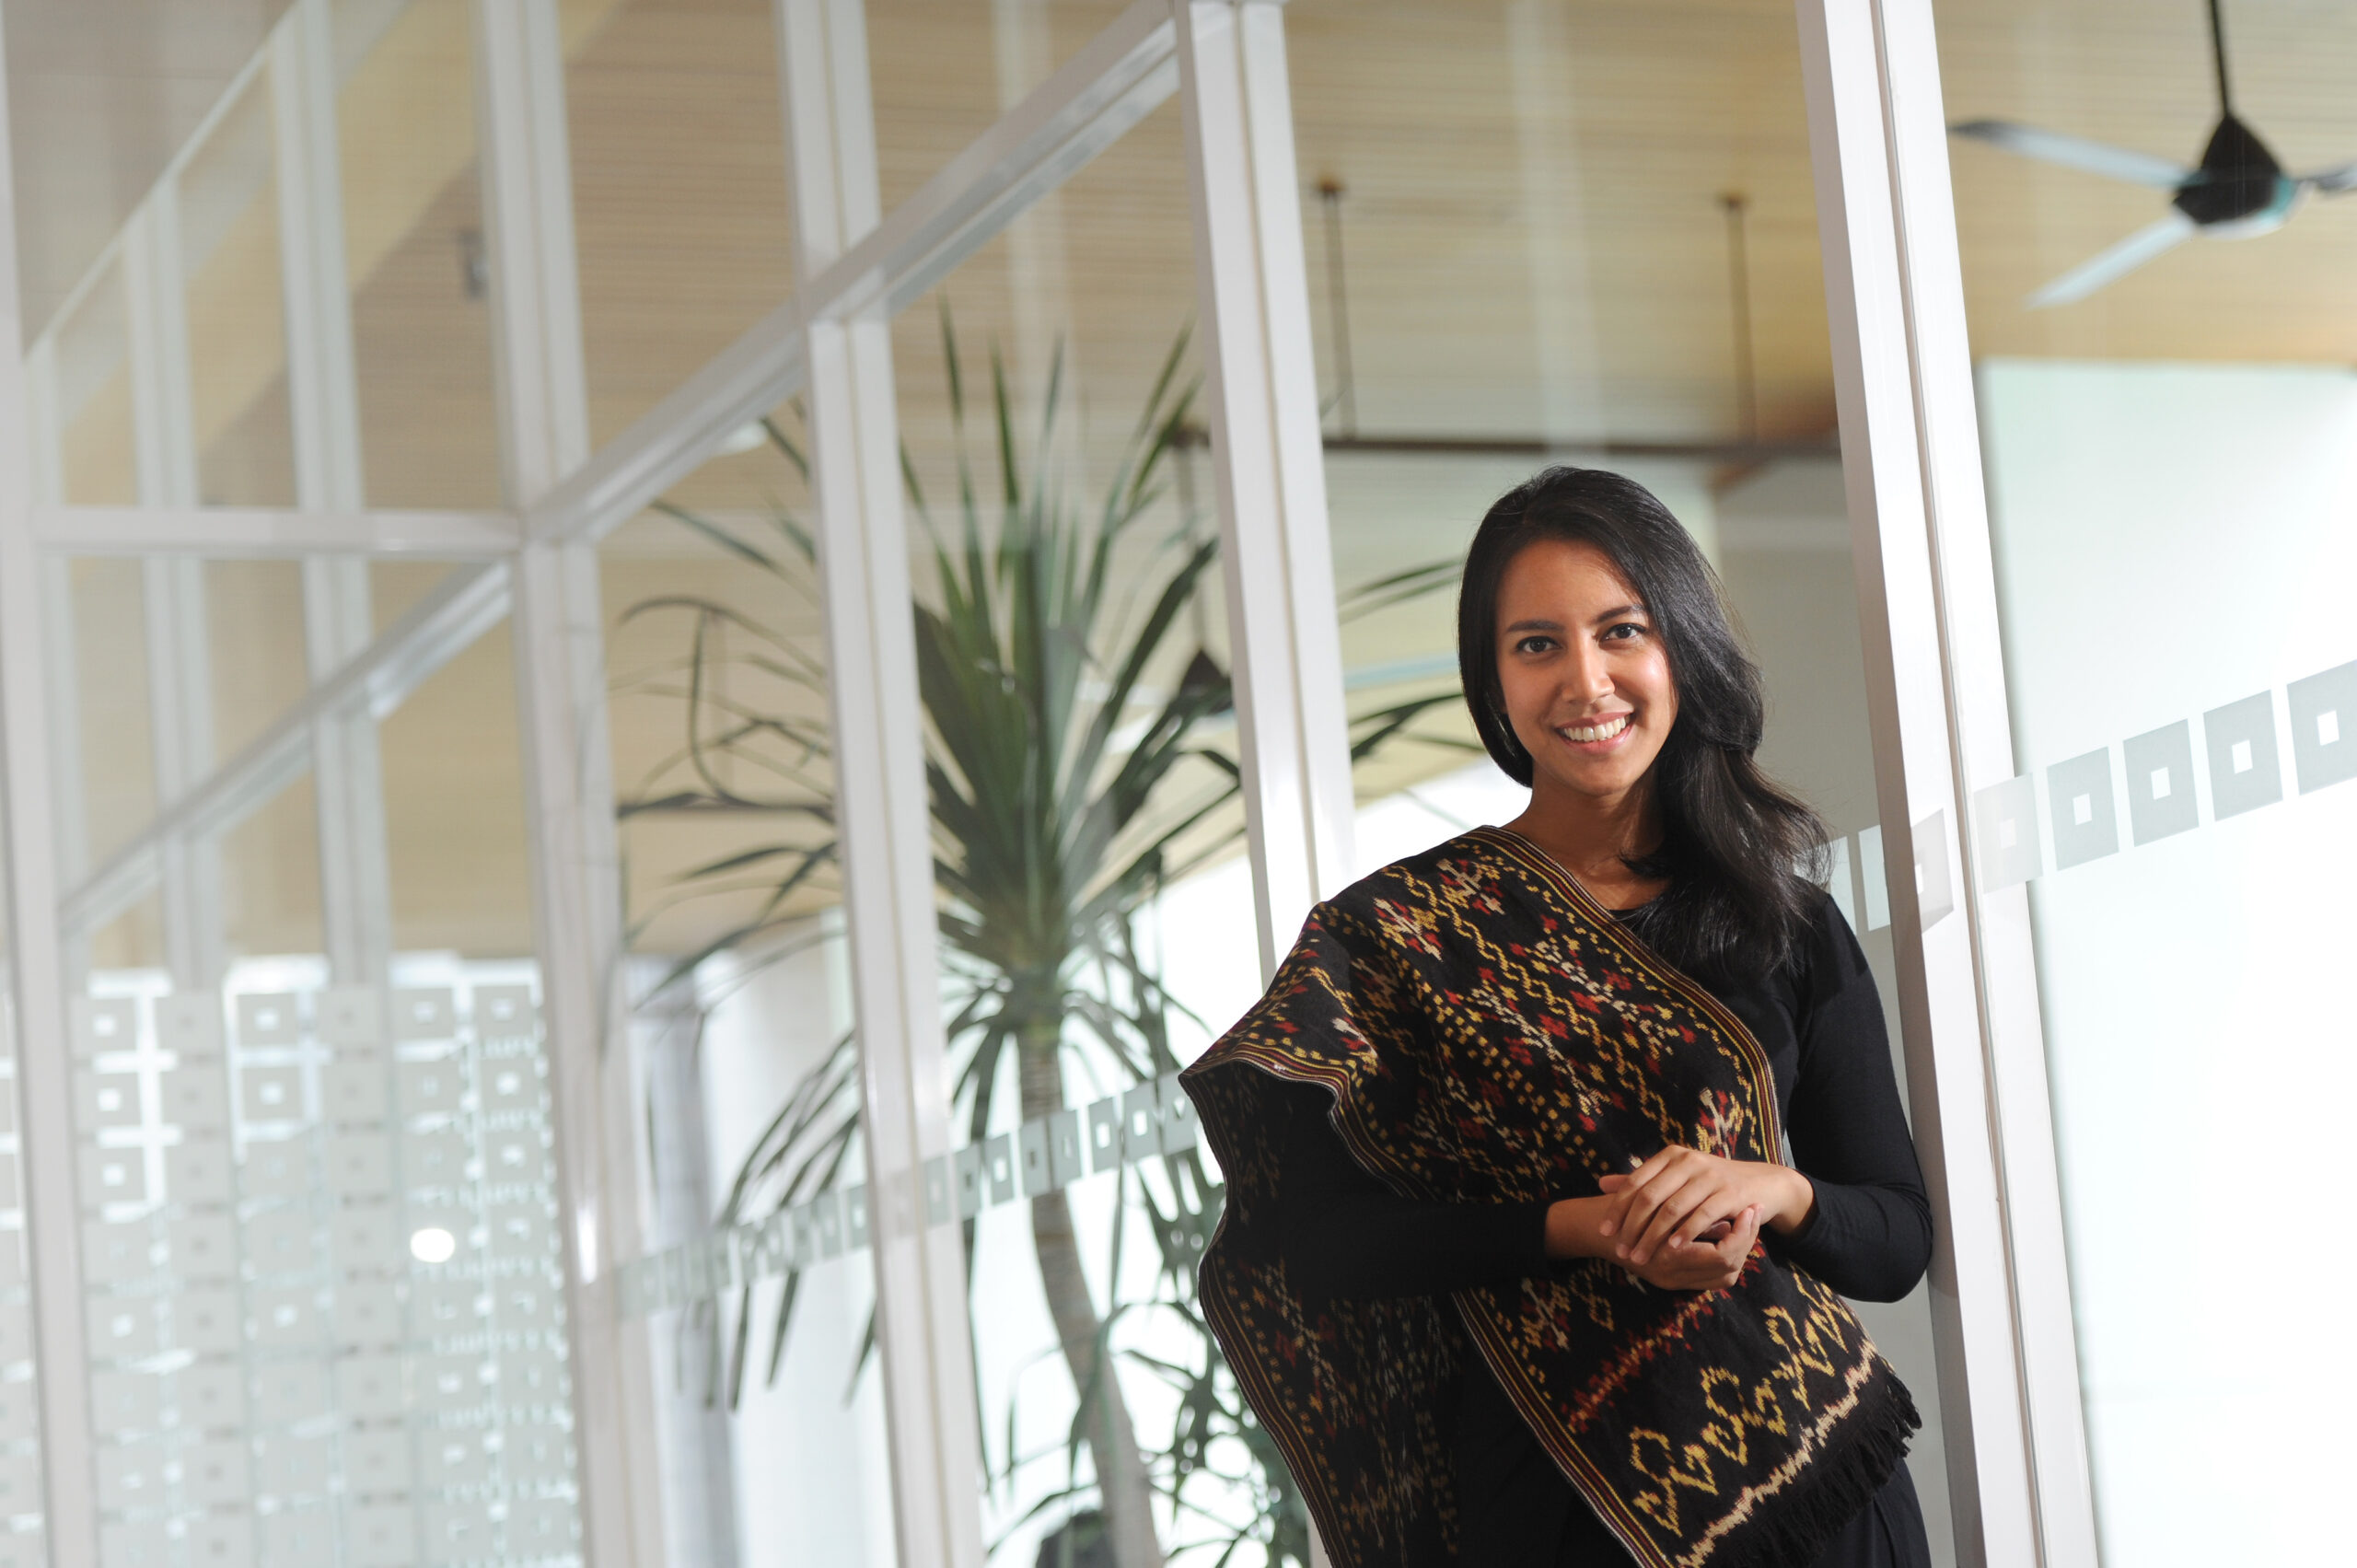 Maryam Rodja, Australia Awards Indonesia awardee is standing in front of large glass windows. She wears a sash with a traditional Indonesian Batik pattern with a black long sleeve top.